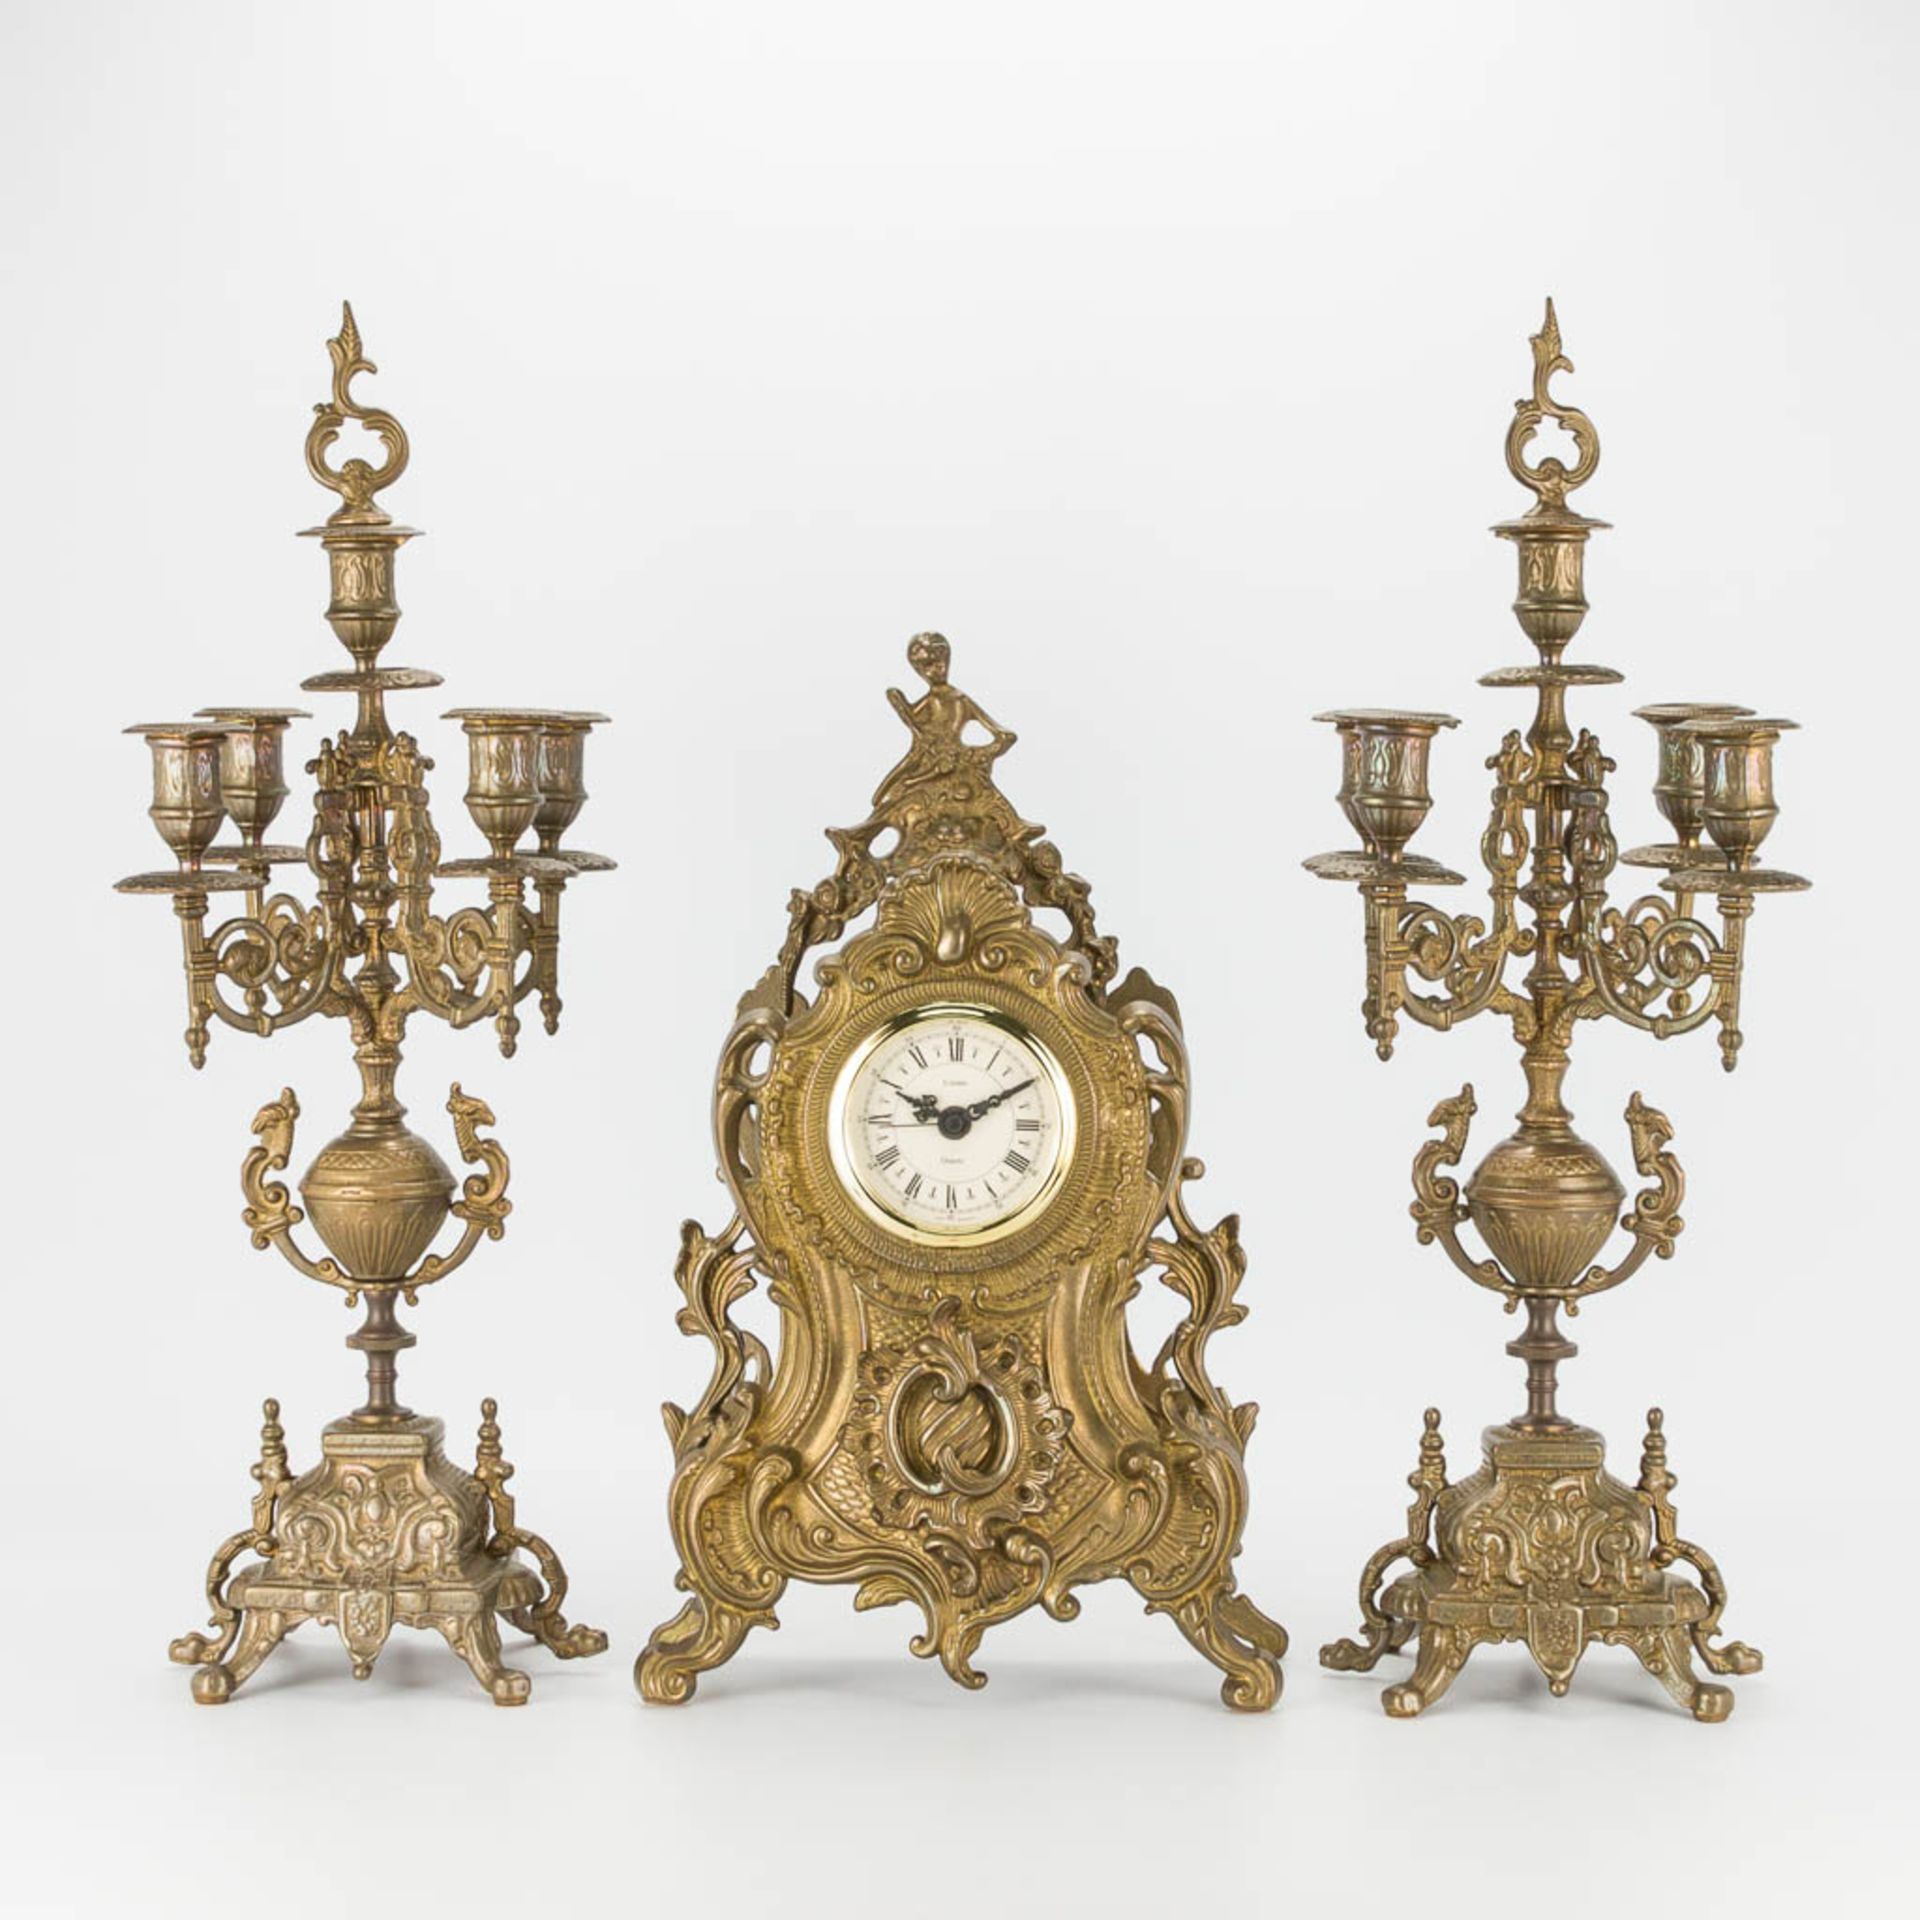 A bronze 3-piece garniture with clock and candelabra. The second half of the 20th century. (22 x 22